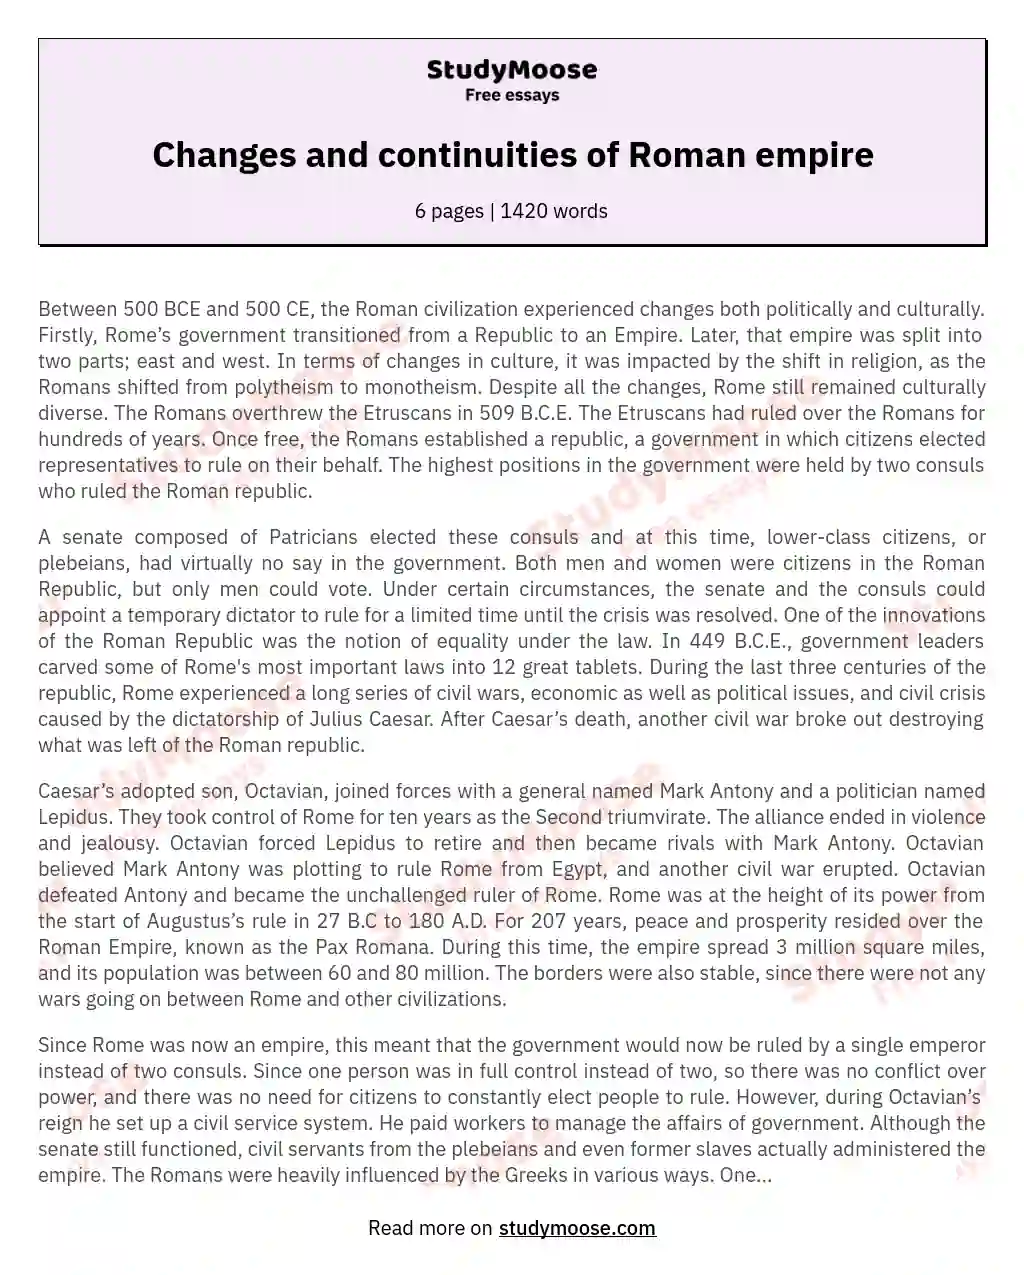 Changes and continuities of Roman empire essay